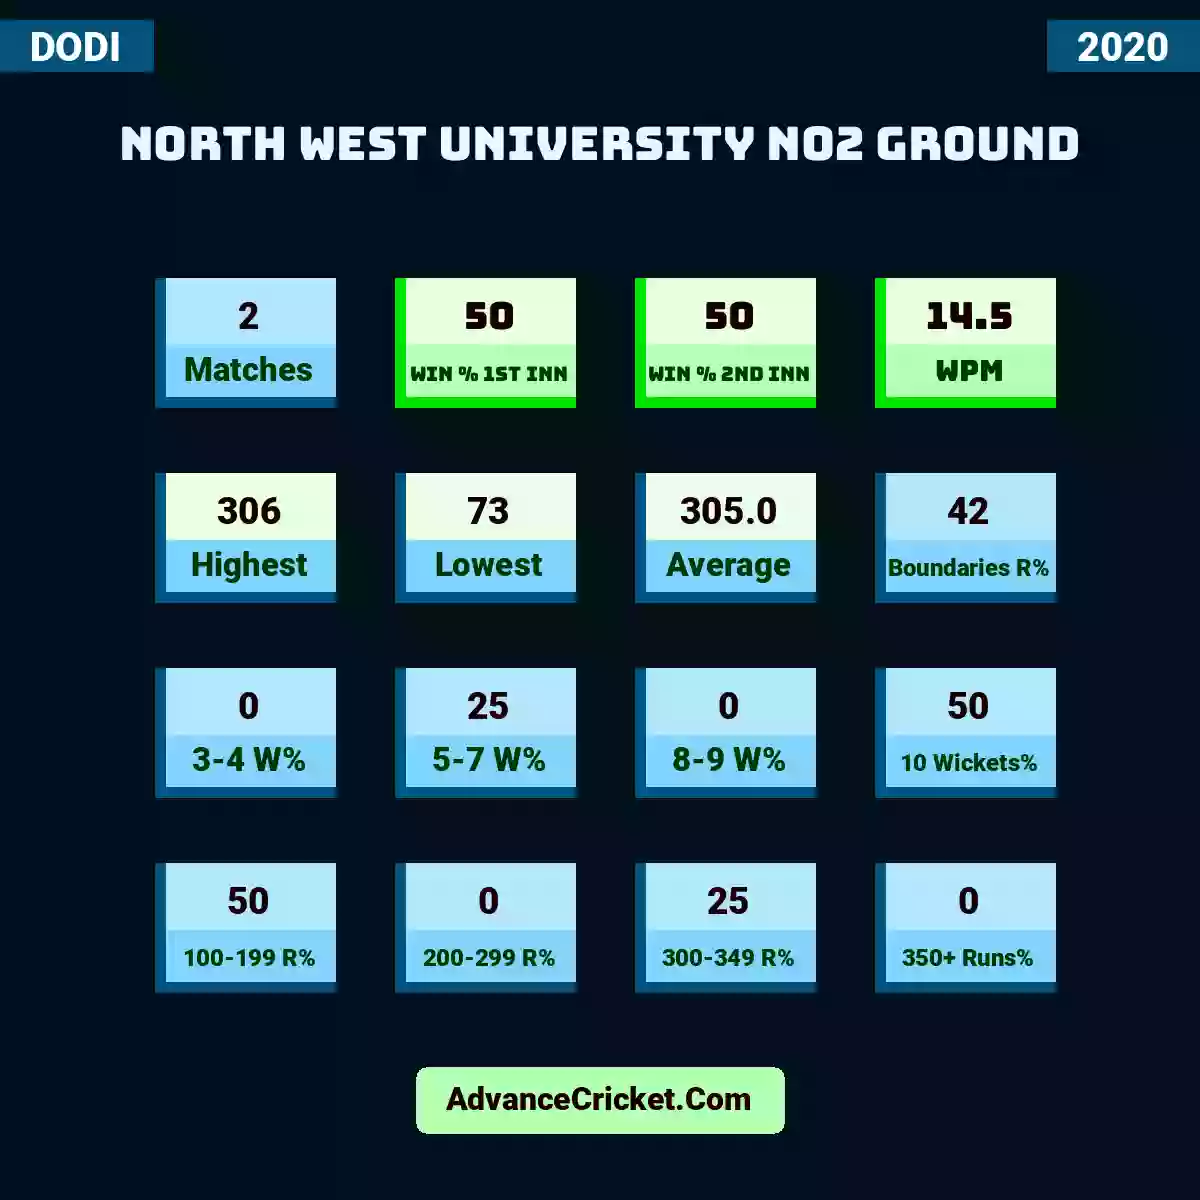 Image showing North West University No2 Ground with Matches: 2, Win % 1st Inn: 50, Win % 2nd Inn: 50, WPM: 14.5, Highest: 306, Lowest: 73, Average: 305.0, Boundaries R%: 42, 3-4 W%: 0, 5-7 W%: 25, 8-9 W%: 0, 10 Wickets%: 50, 100-199 R%: 50, 200-299 R%: 0, 300-349 R%: 25, 350+ Runs%: 0.